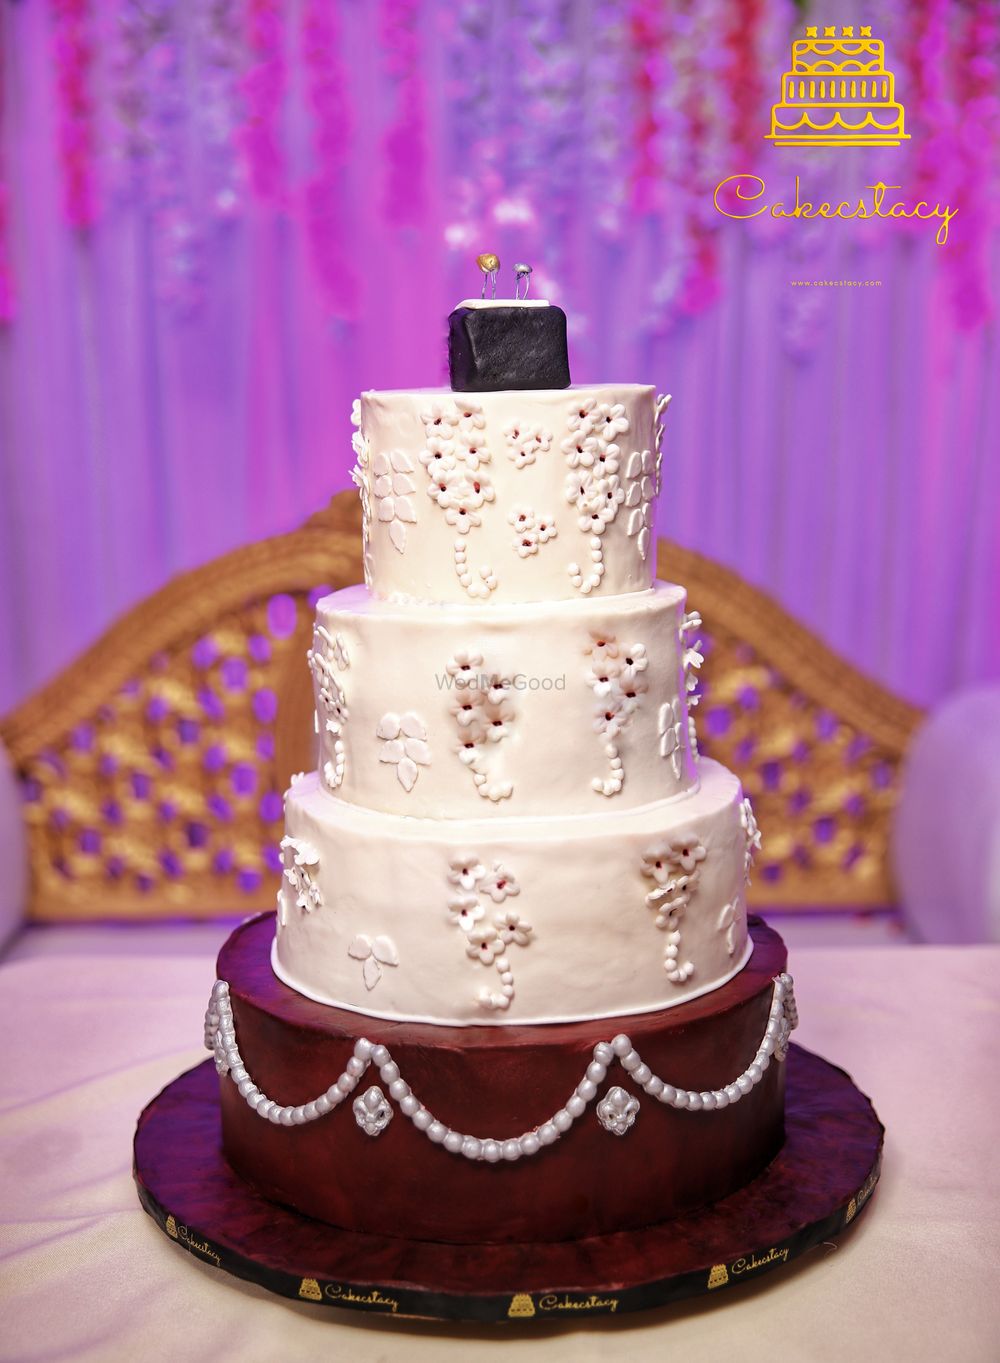 Photo From Wedding Cakes 2019 - By Cakecstacy